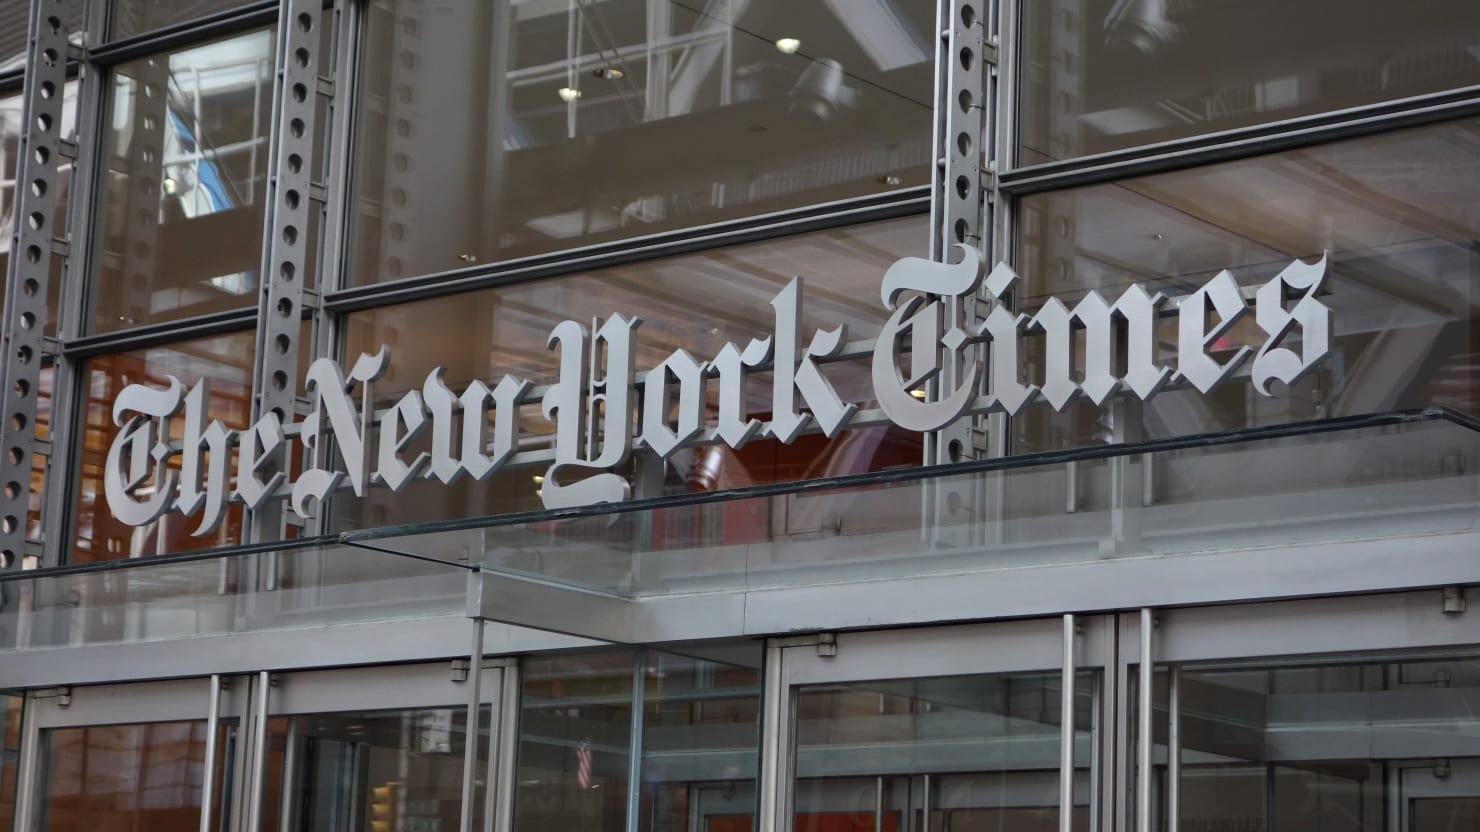 NY Times Assistant Adam Rubenstein, Who Edited Tom Cotton’s ‘Send in the Troops’ Column, Resigns